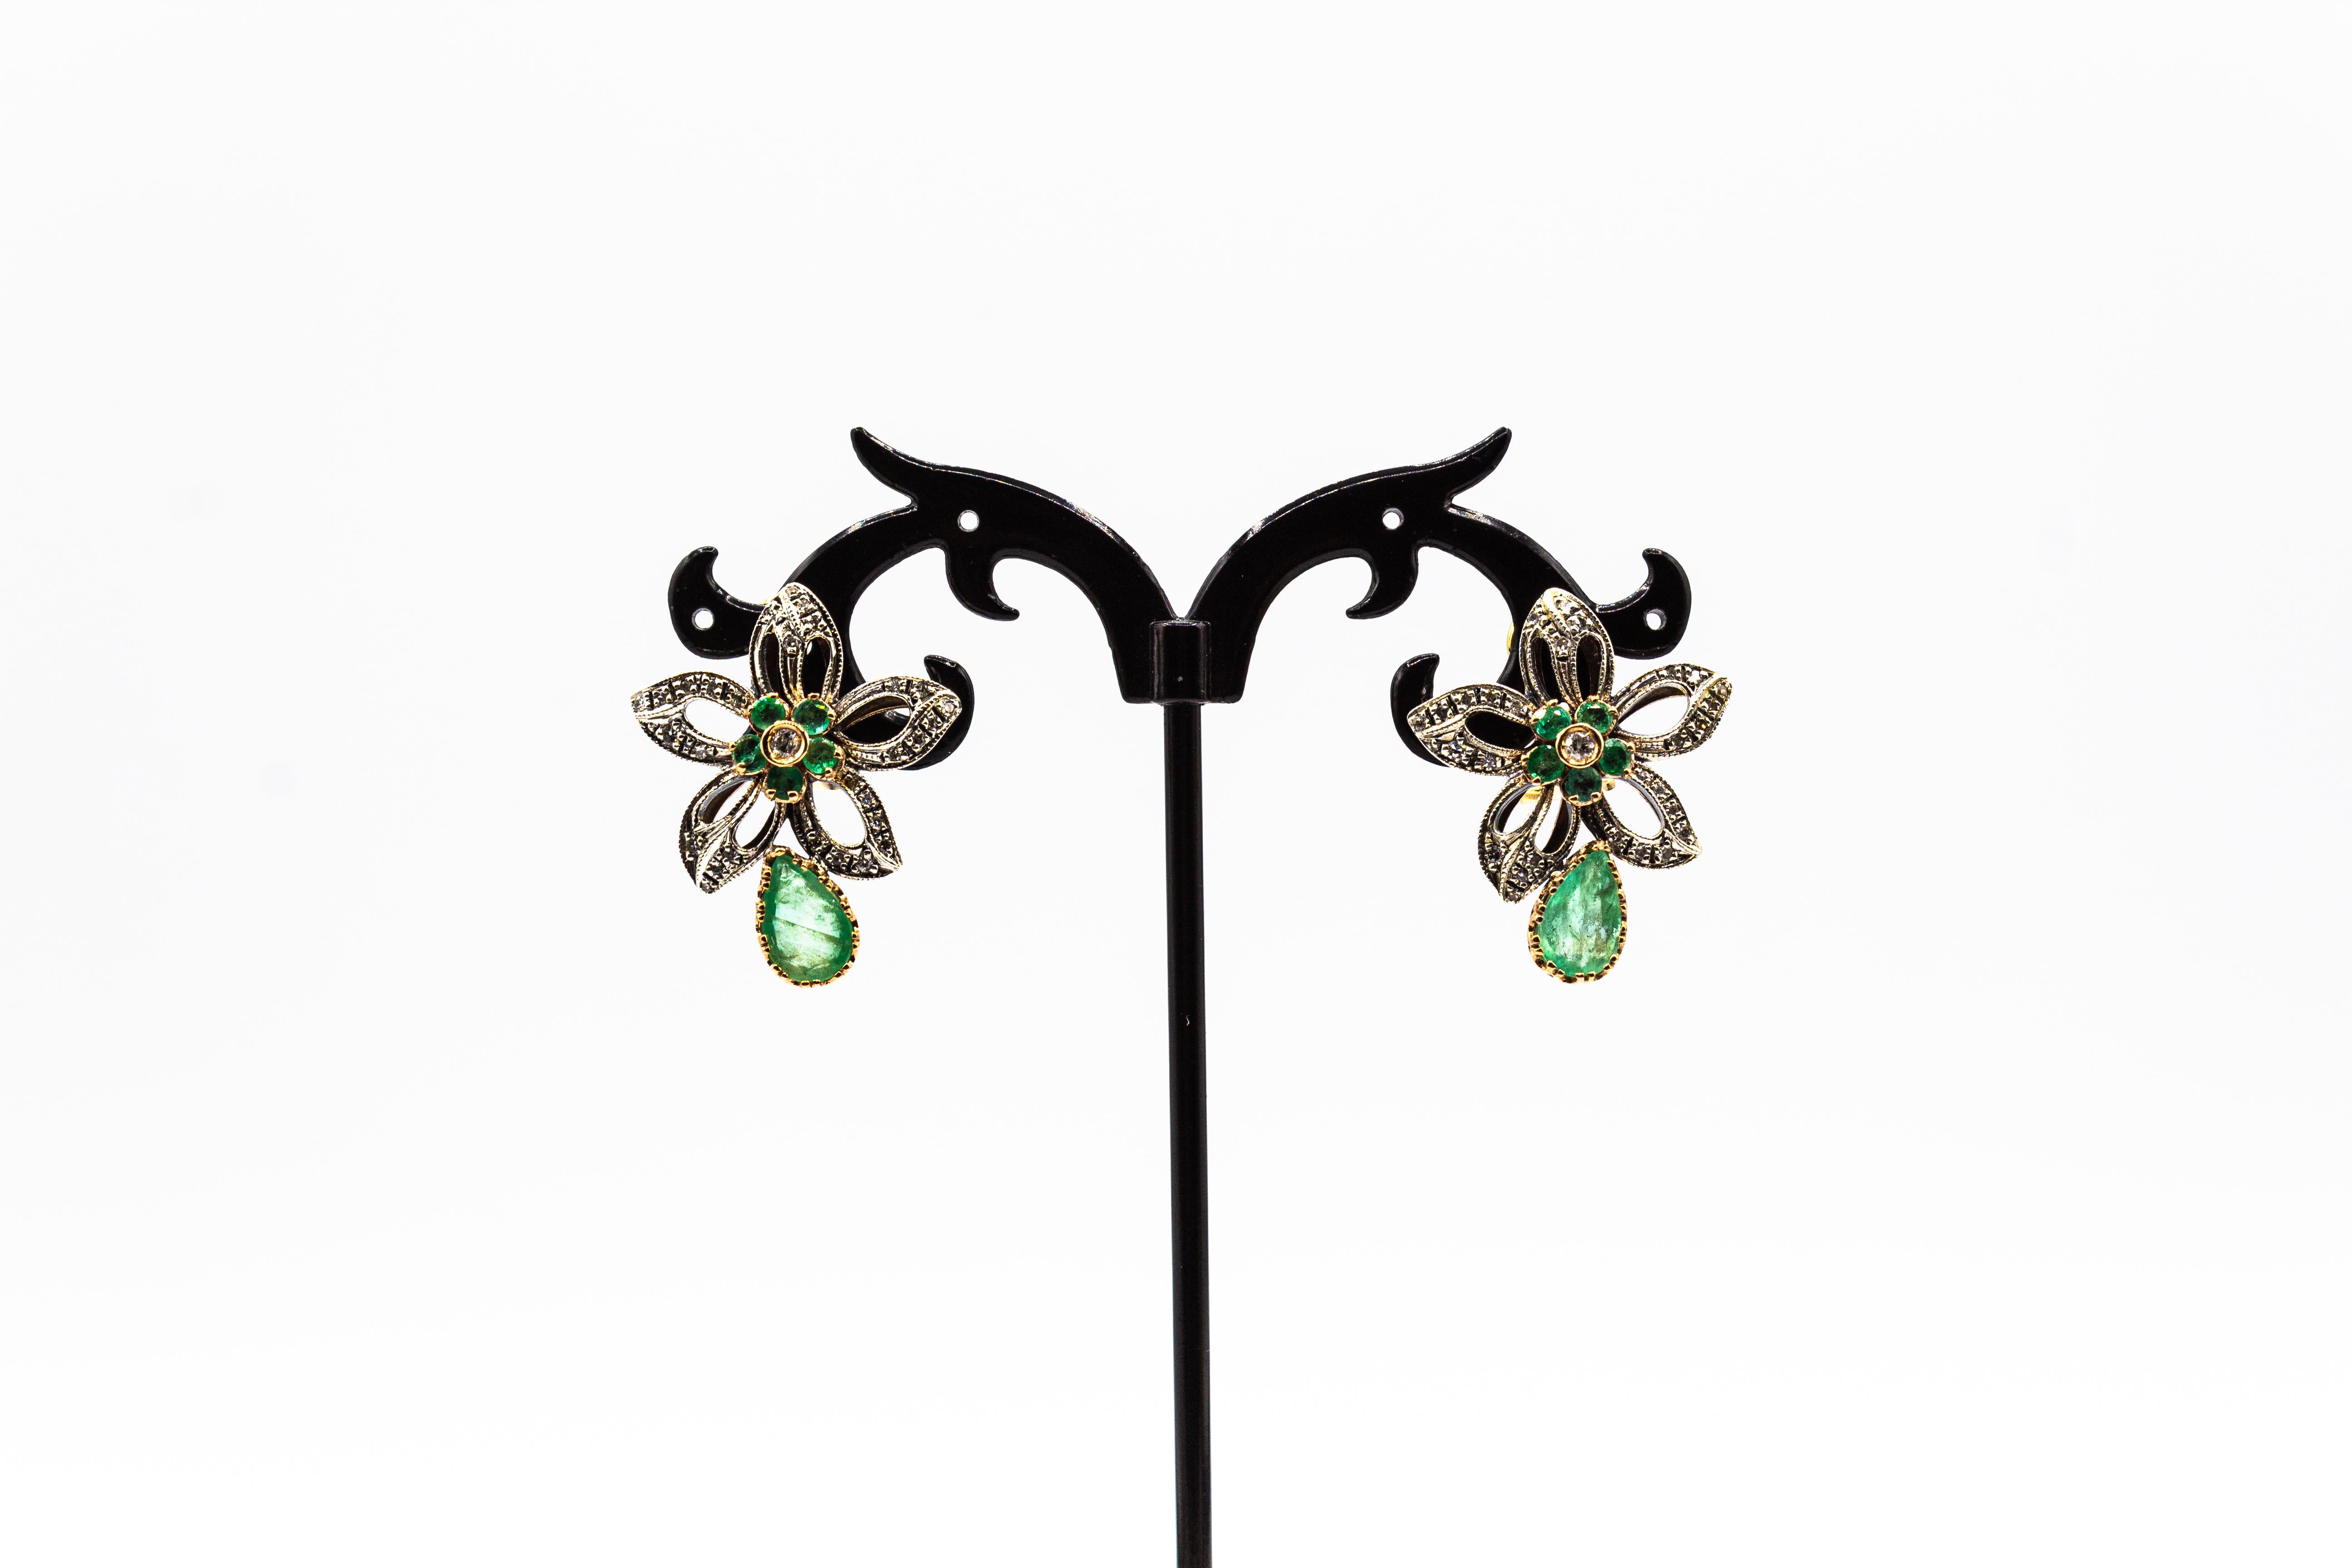 These Clip-On Earrings are made of 9K Yellow Gold and Sterling Silver.
These Earrings have 0.60 Carats of White Old European Cut Diamonds.
These Earrings have also 2.80 Carat of Pear Cut and Round Cut Emeralds.

These Earrings are available also